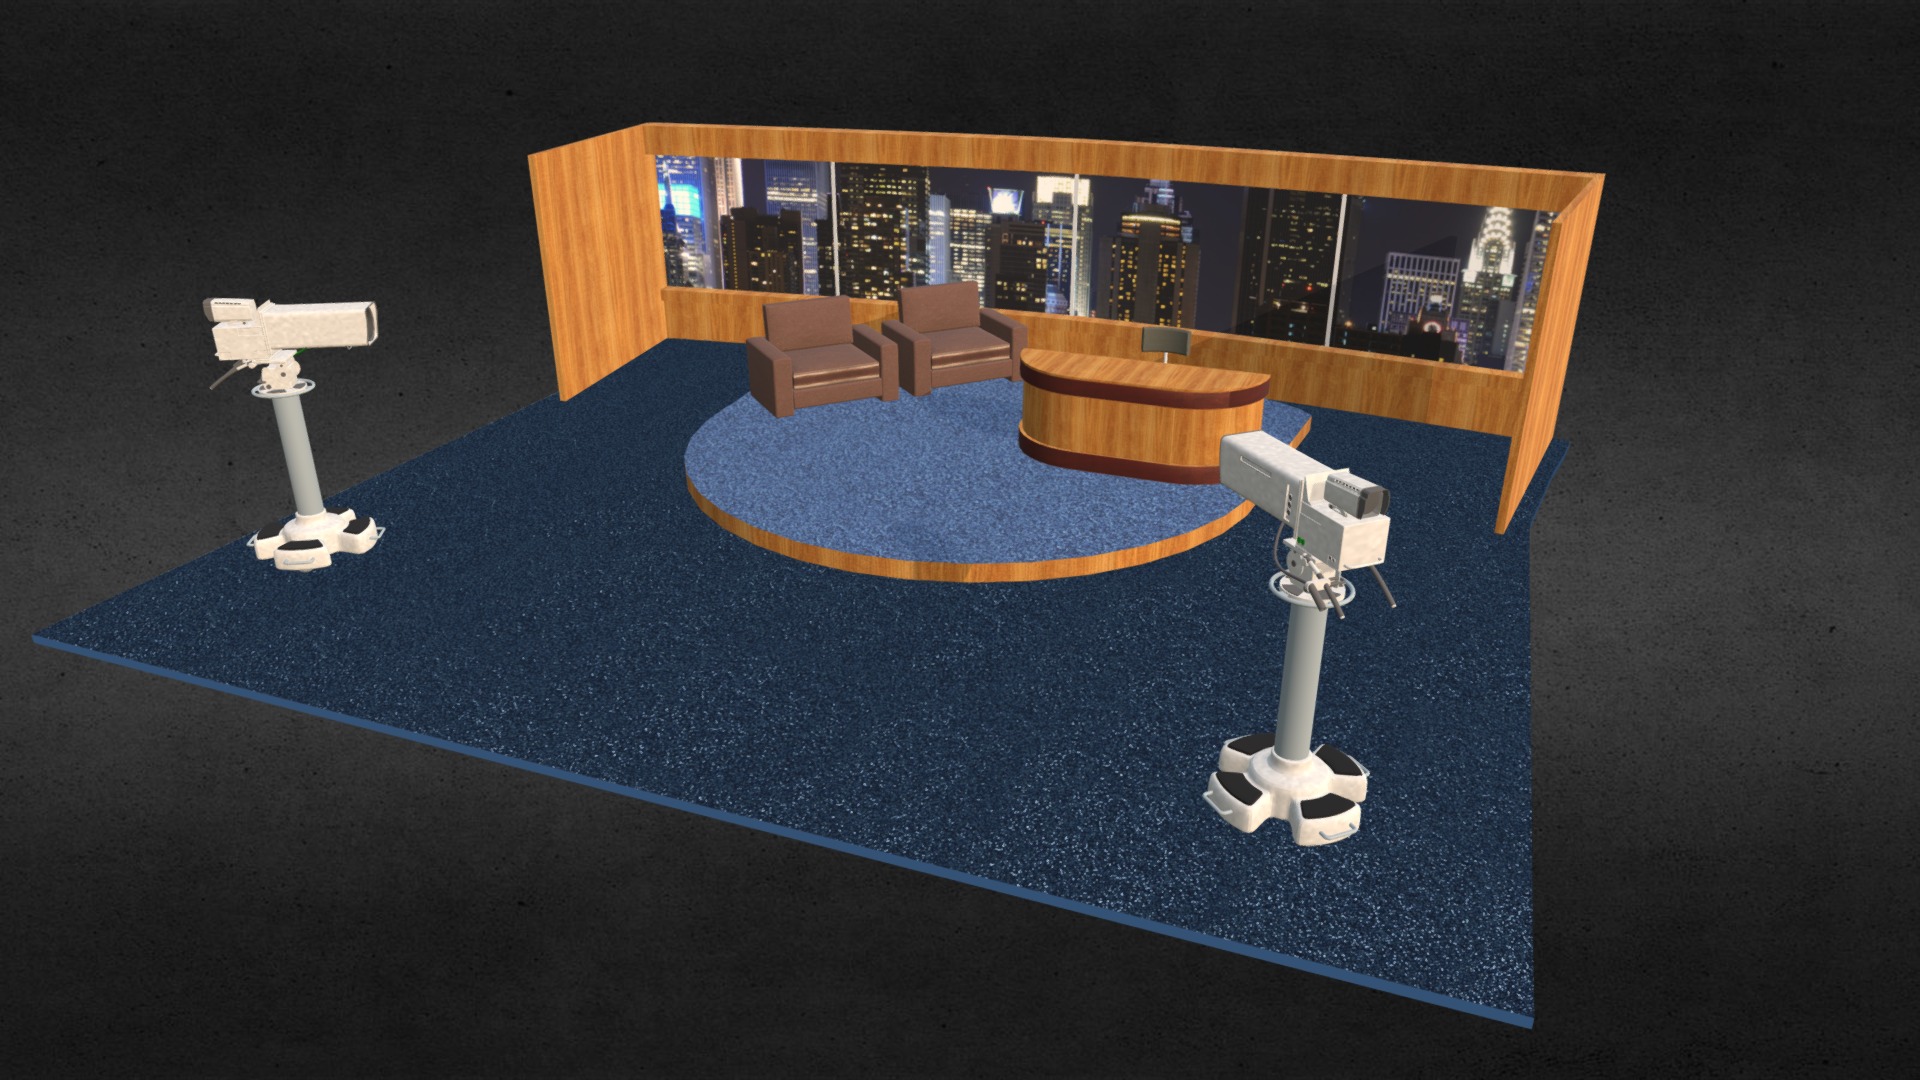 3D model Late Night TV Show Set - This is a 3D model of the Late Night TV Show Set. The 3D model is about a table with a game board and toys on it.